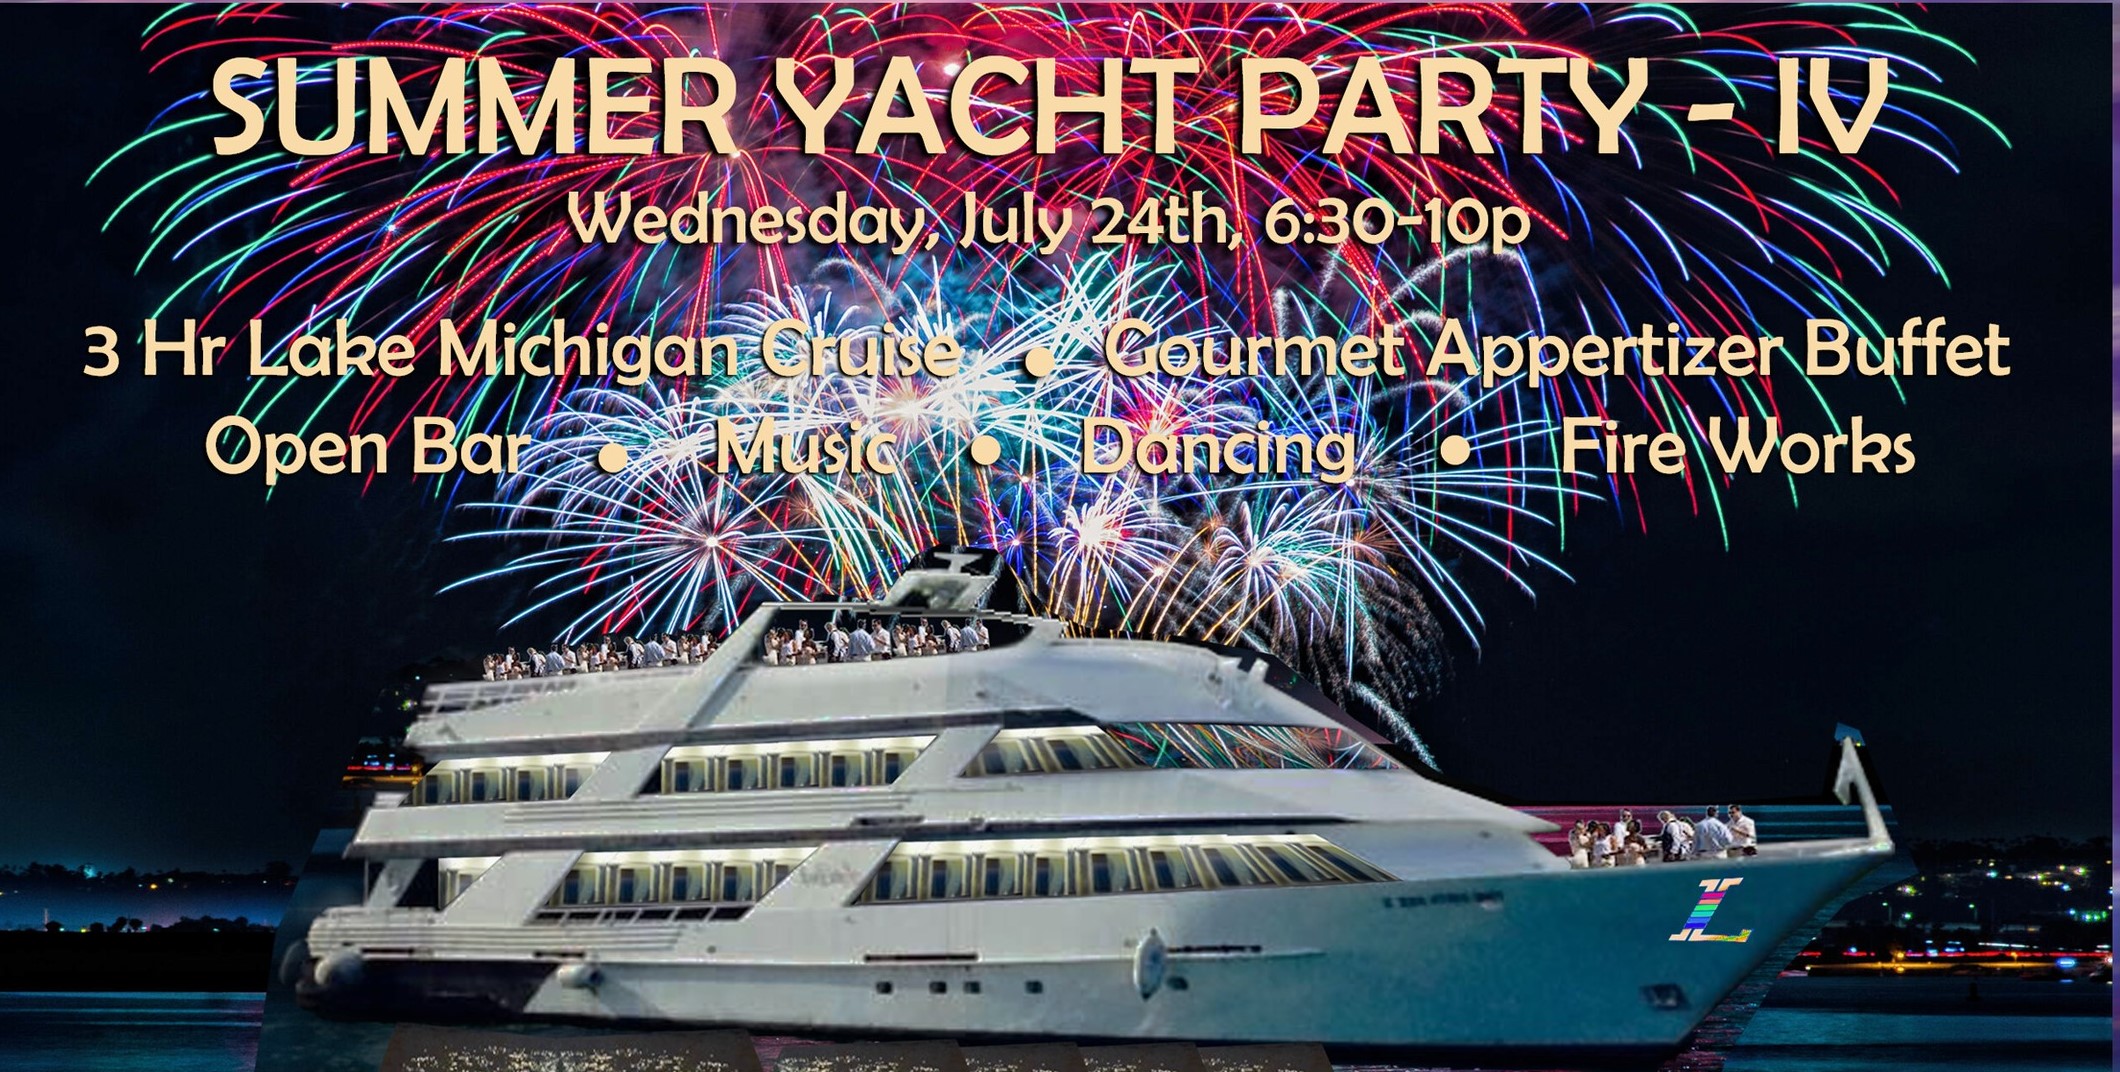 LEGACY PROJECT PRESENTS Mid-Summer Yacht Party IV Won't You Let Us Take You On A (Lega) Sea Cruise